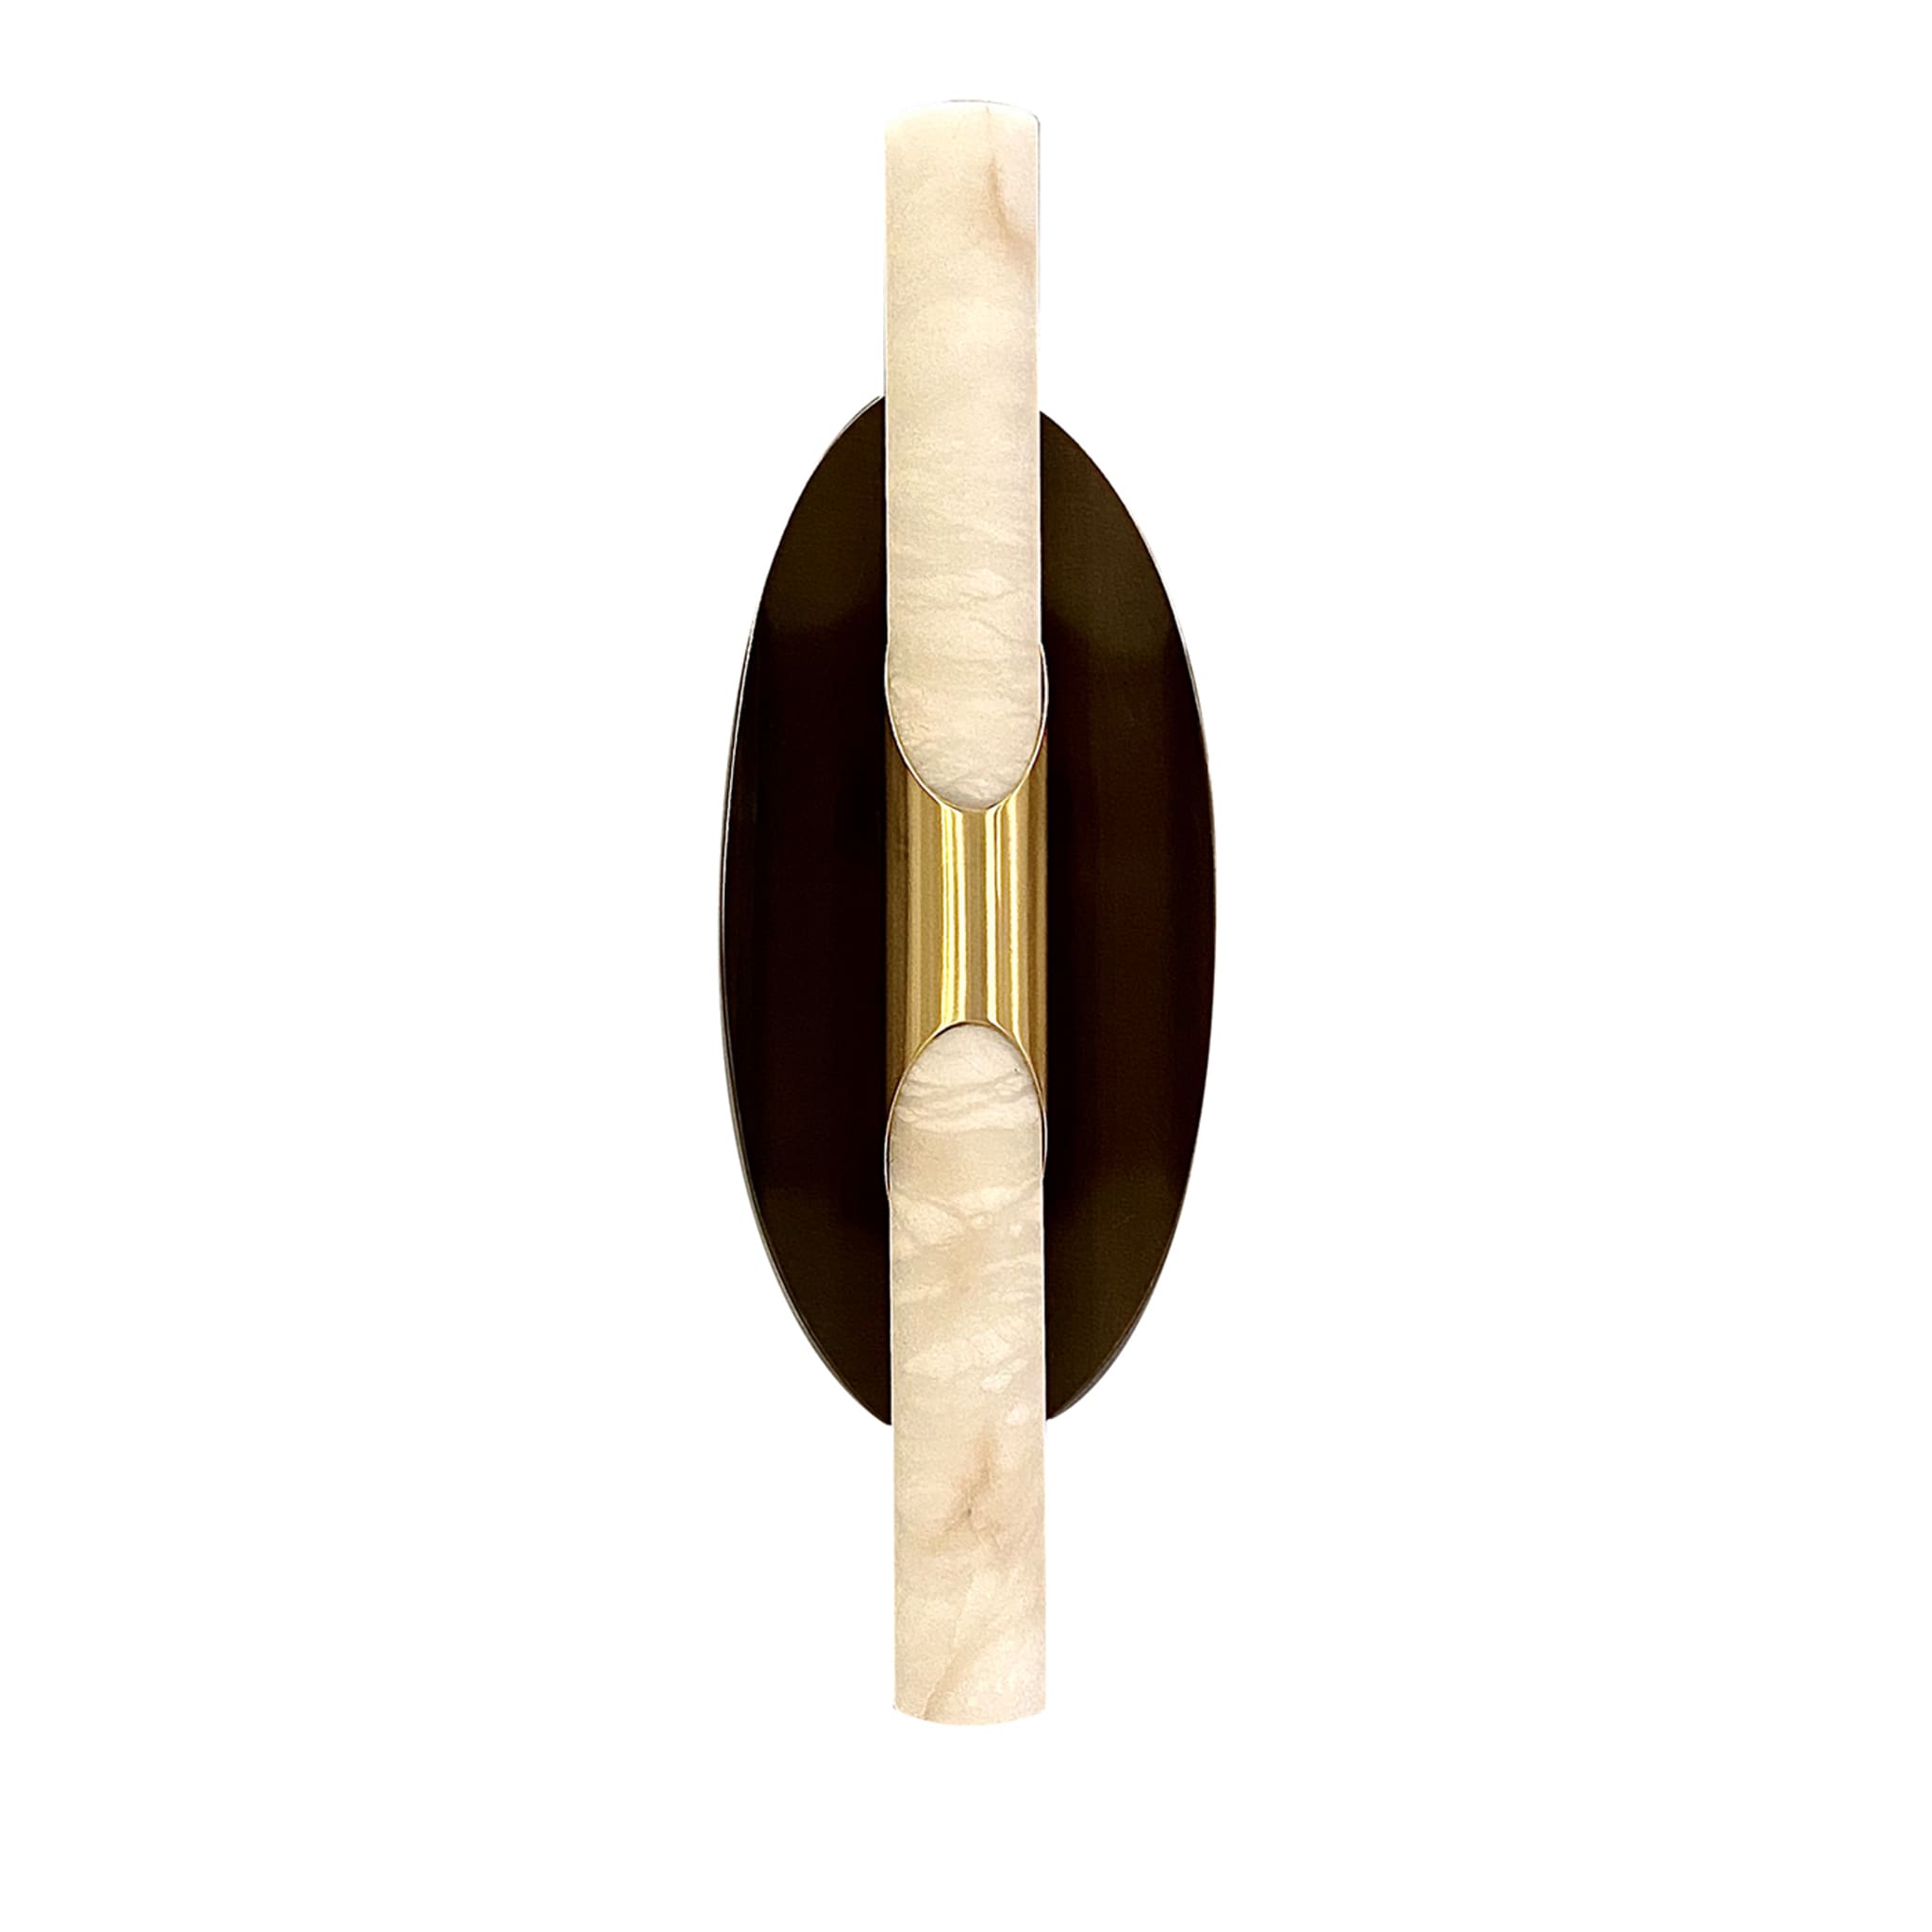 "Manta" Wall Sconce in Brushed Bronze and Satin Brass - Main view